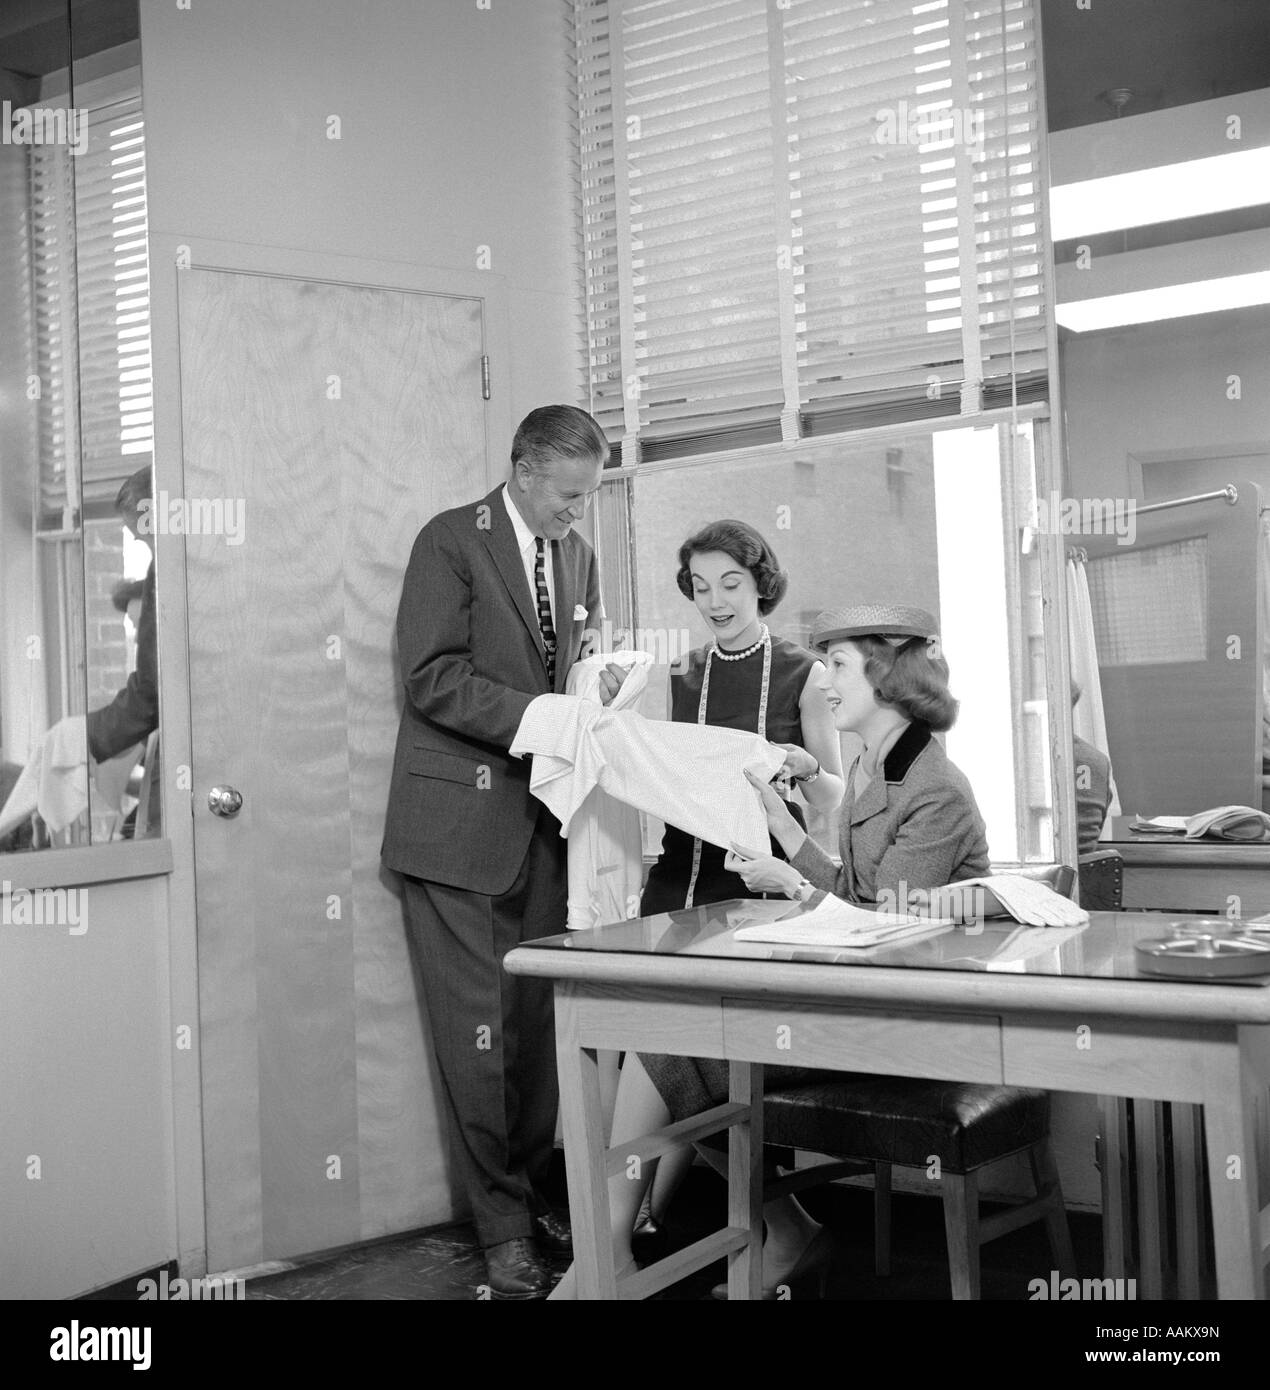 1950s FEMALE FASHION BUYER SELECTING FABRIC IN GARMENT INDUSTRY SHOWROOM Stock Photo